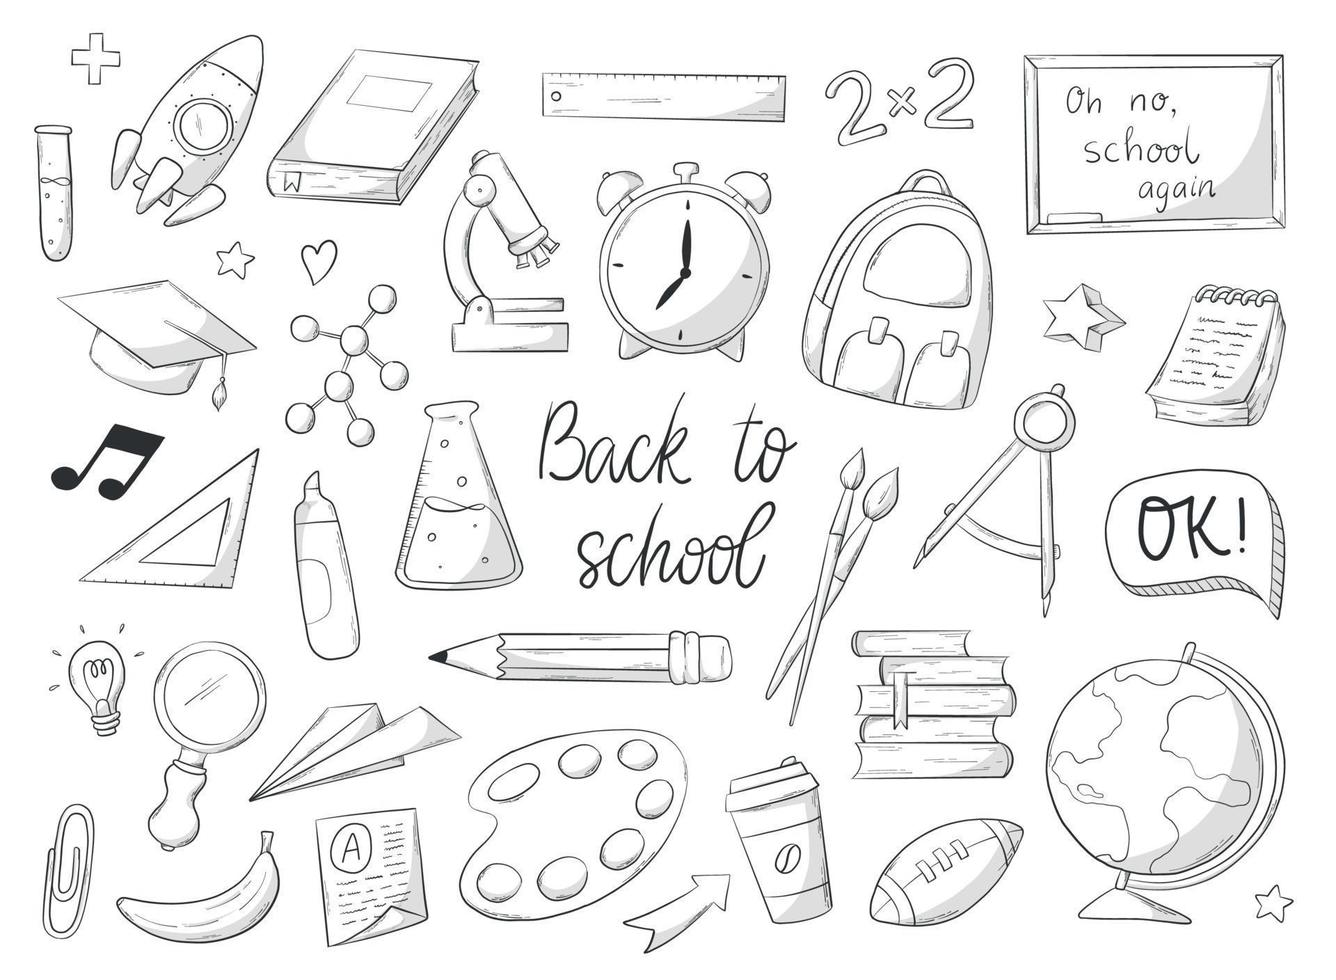 Set of monochrome school and education doodles, clip art, cartoon elements isolated on white background. Back to school coloring page, stickers, prints, cards design. EPS 10 vector